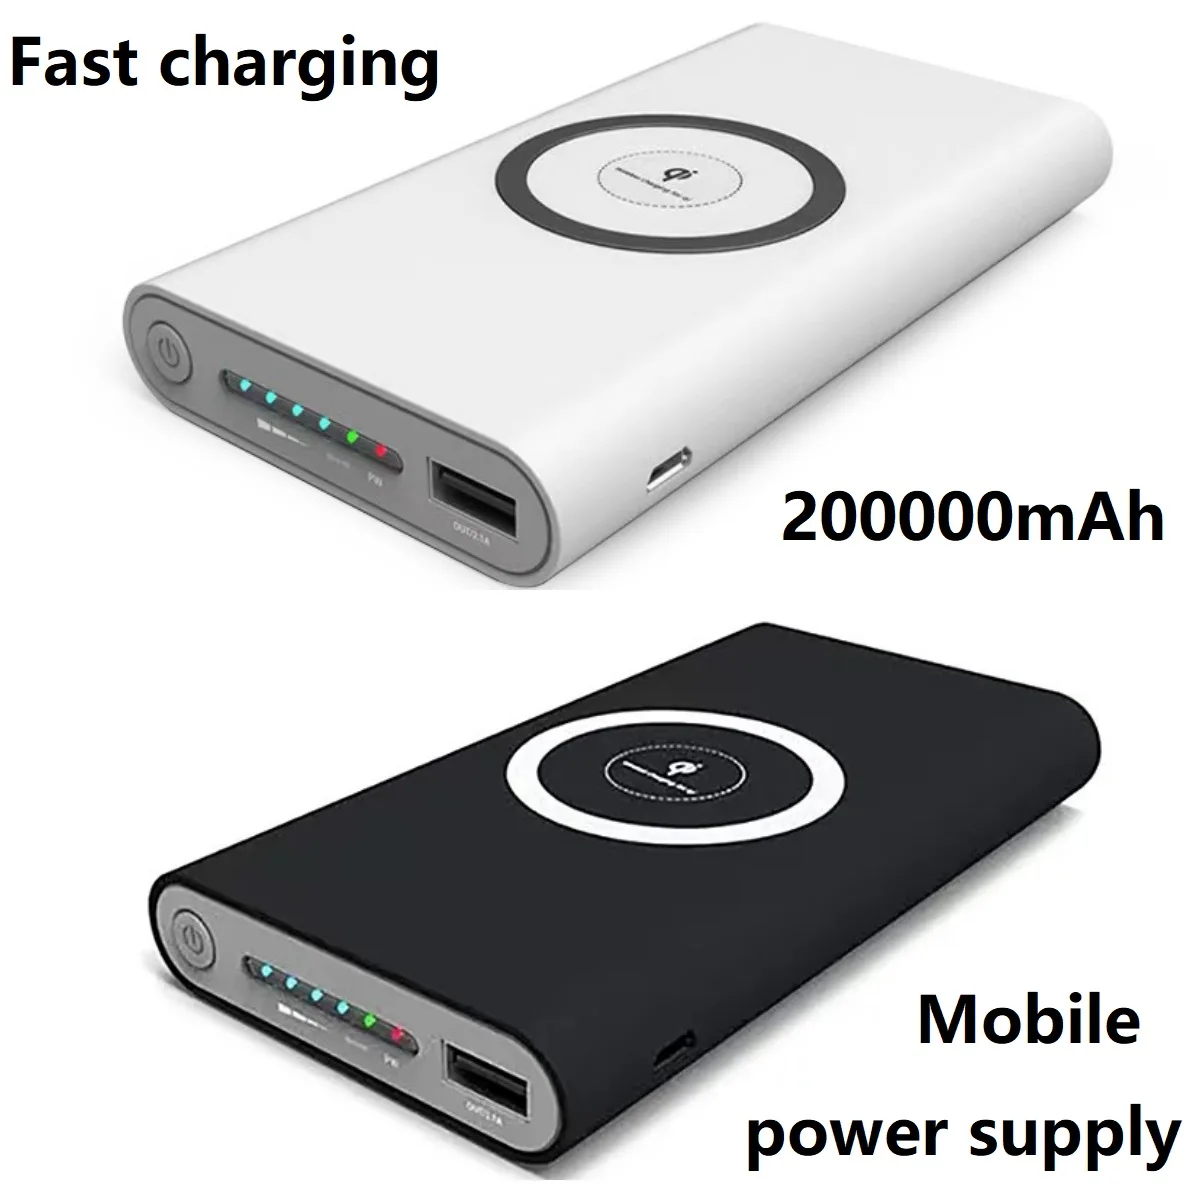 

Free Shipping 200000mAh Wireless Charging Battery Pack Mobile Power USB Bidirectional Fast Charging Suitable forApple andAndroid